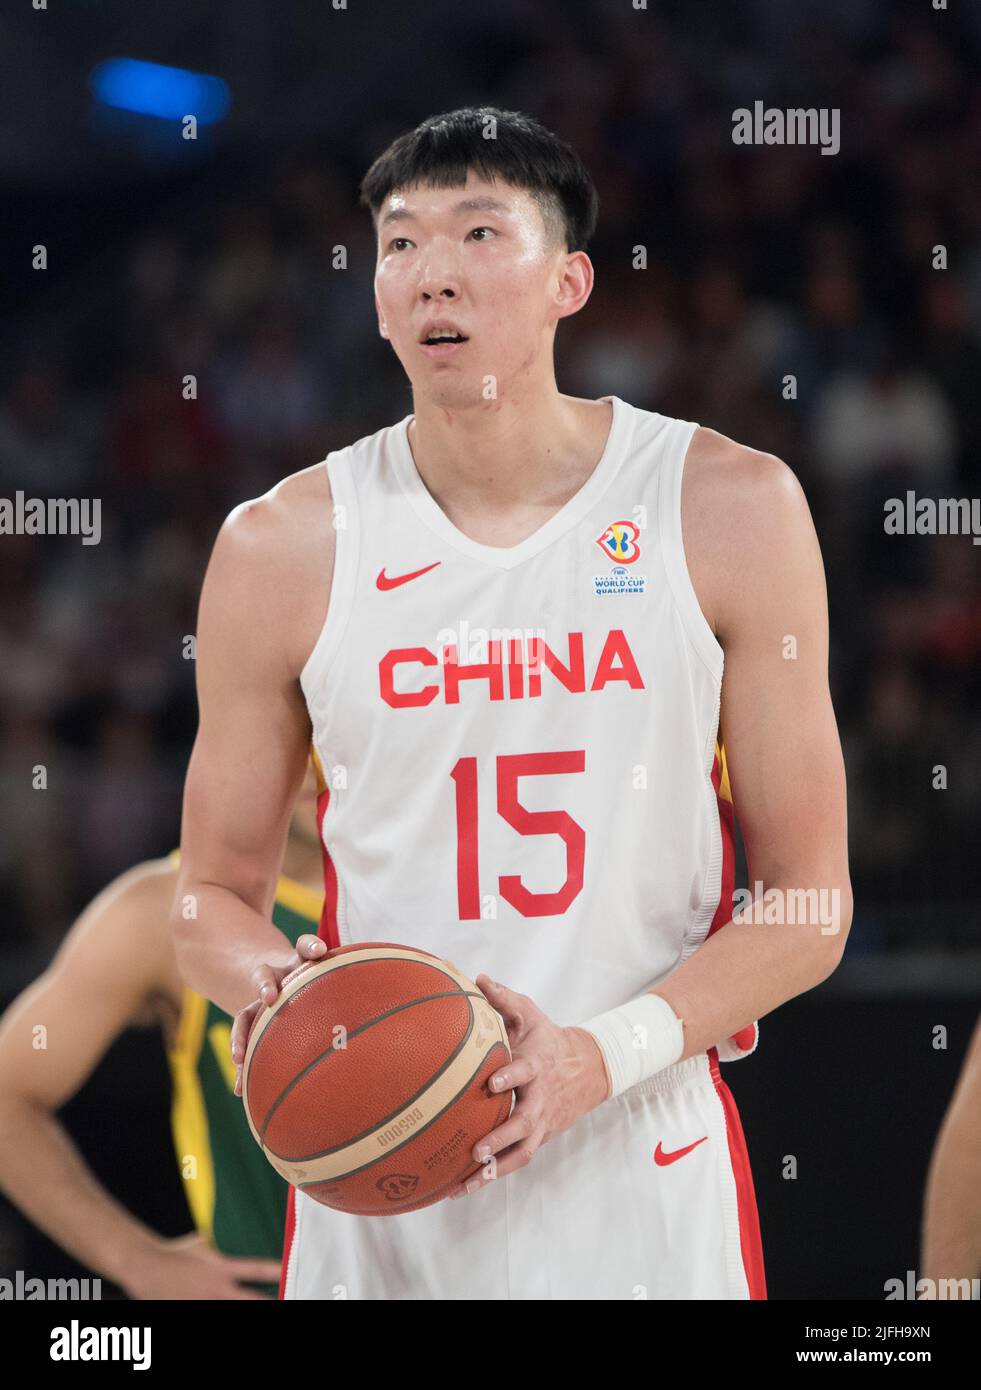 Melbourne, Australia. 03rd July, 2022. Qi Zhou of China Basketball team in  action during the FIBA World Cup 2023 Qualifiers Group B Window 3 game  between China and Australia held at John